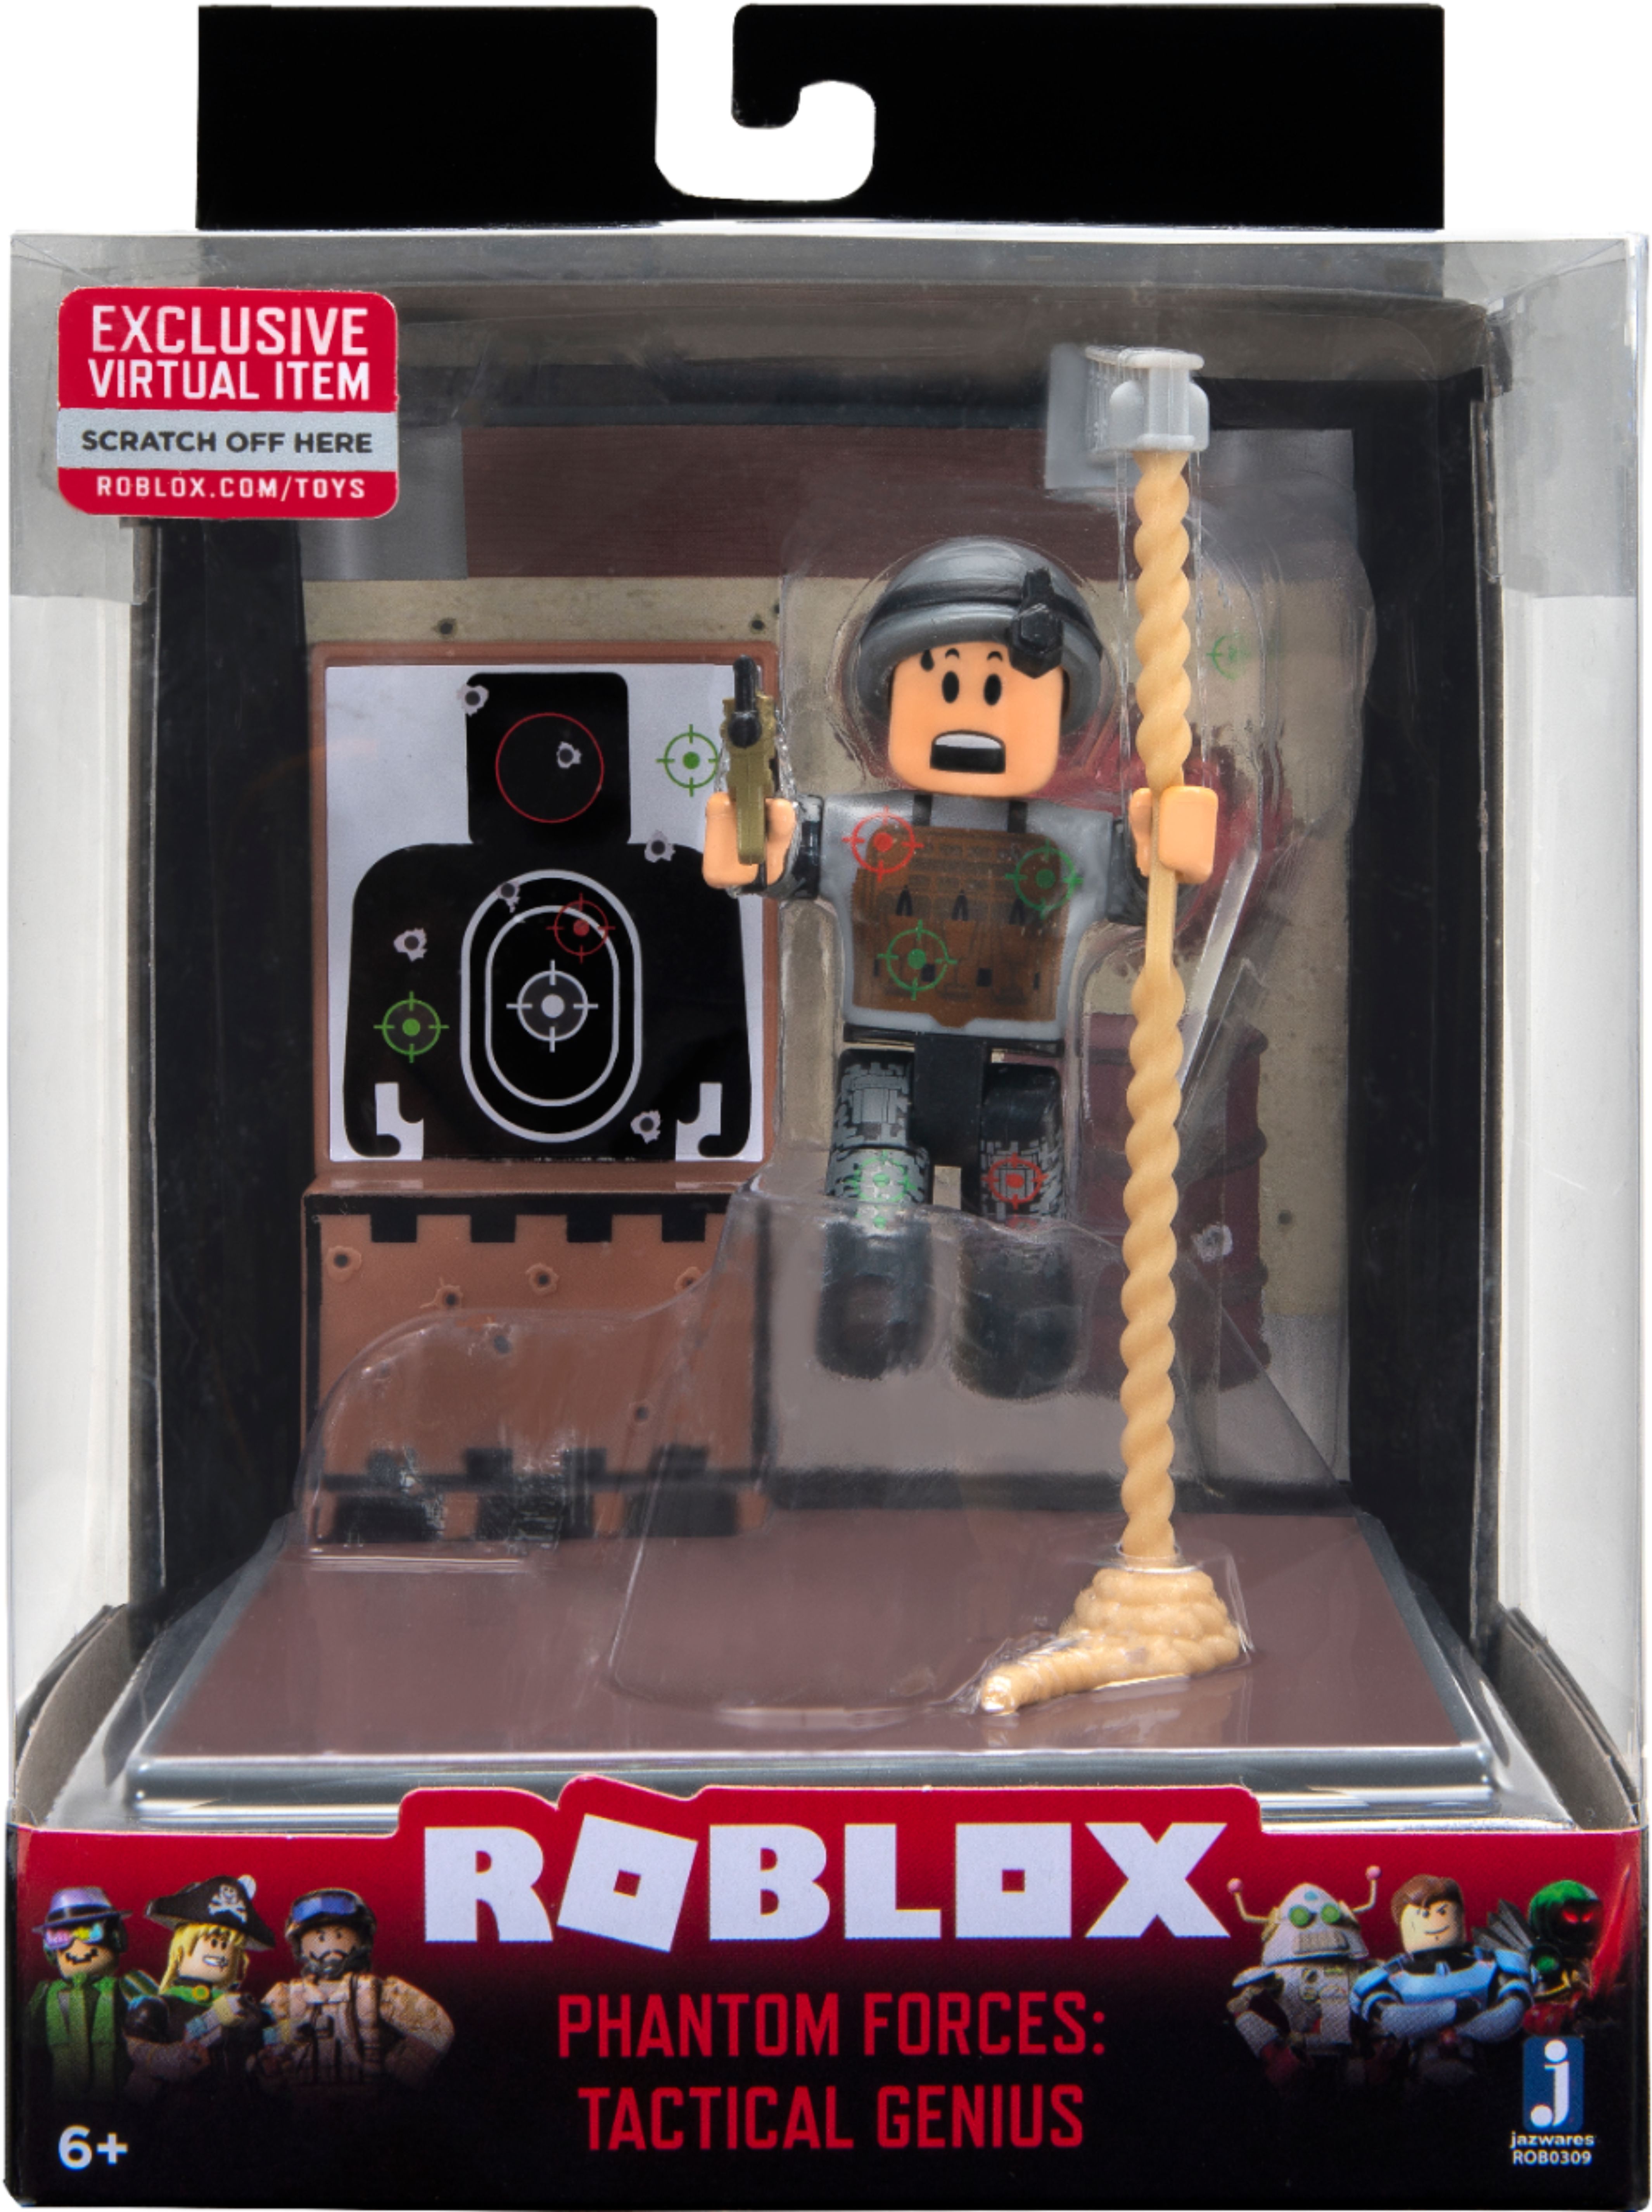 Jazwares Roblox Desktop Series Action Figure Styles May Vary Rob0253 Best Buy - roblox roblox series 1 lets make a deal action figure